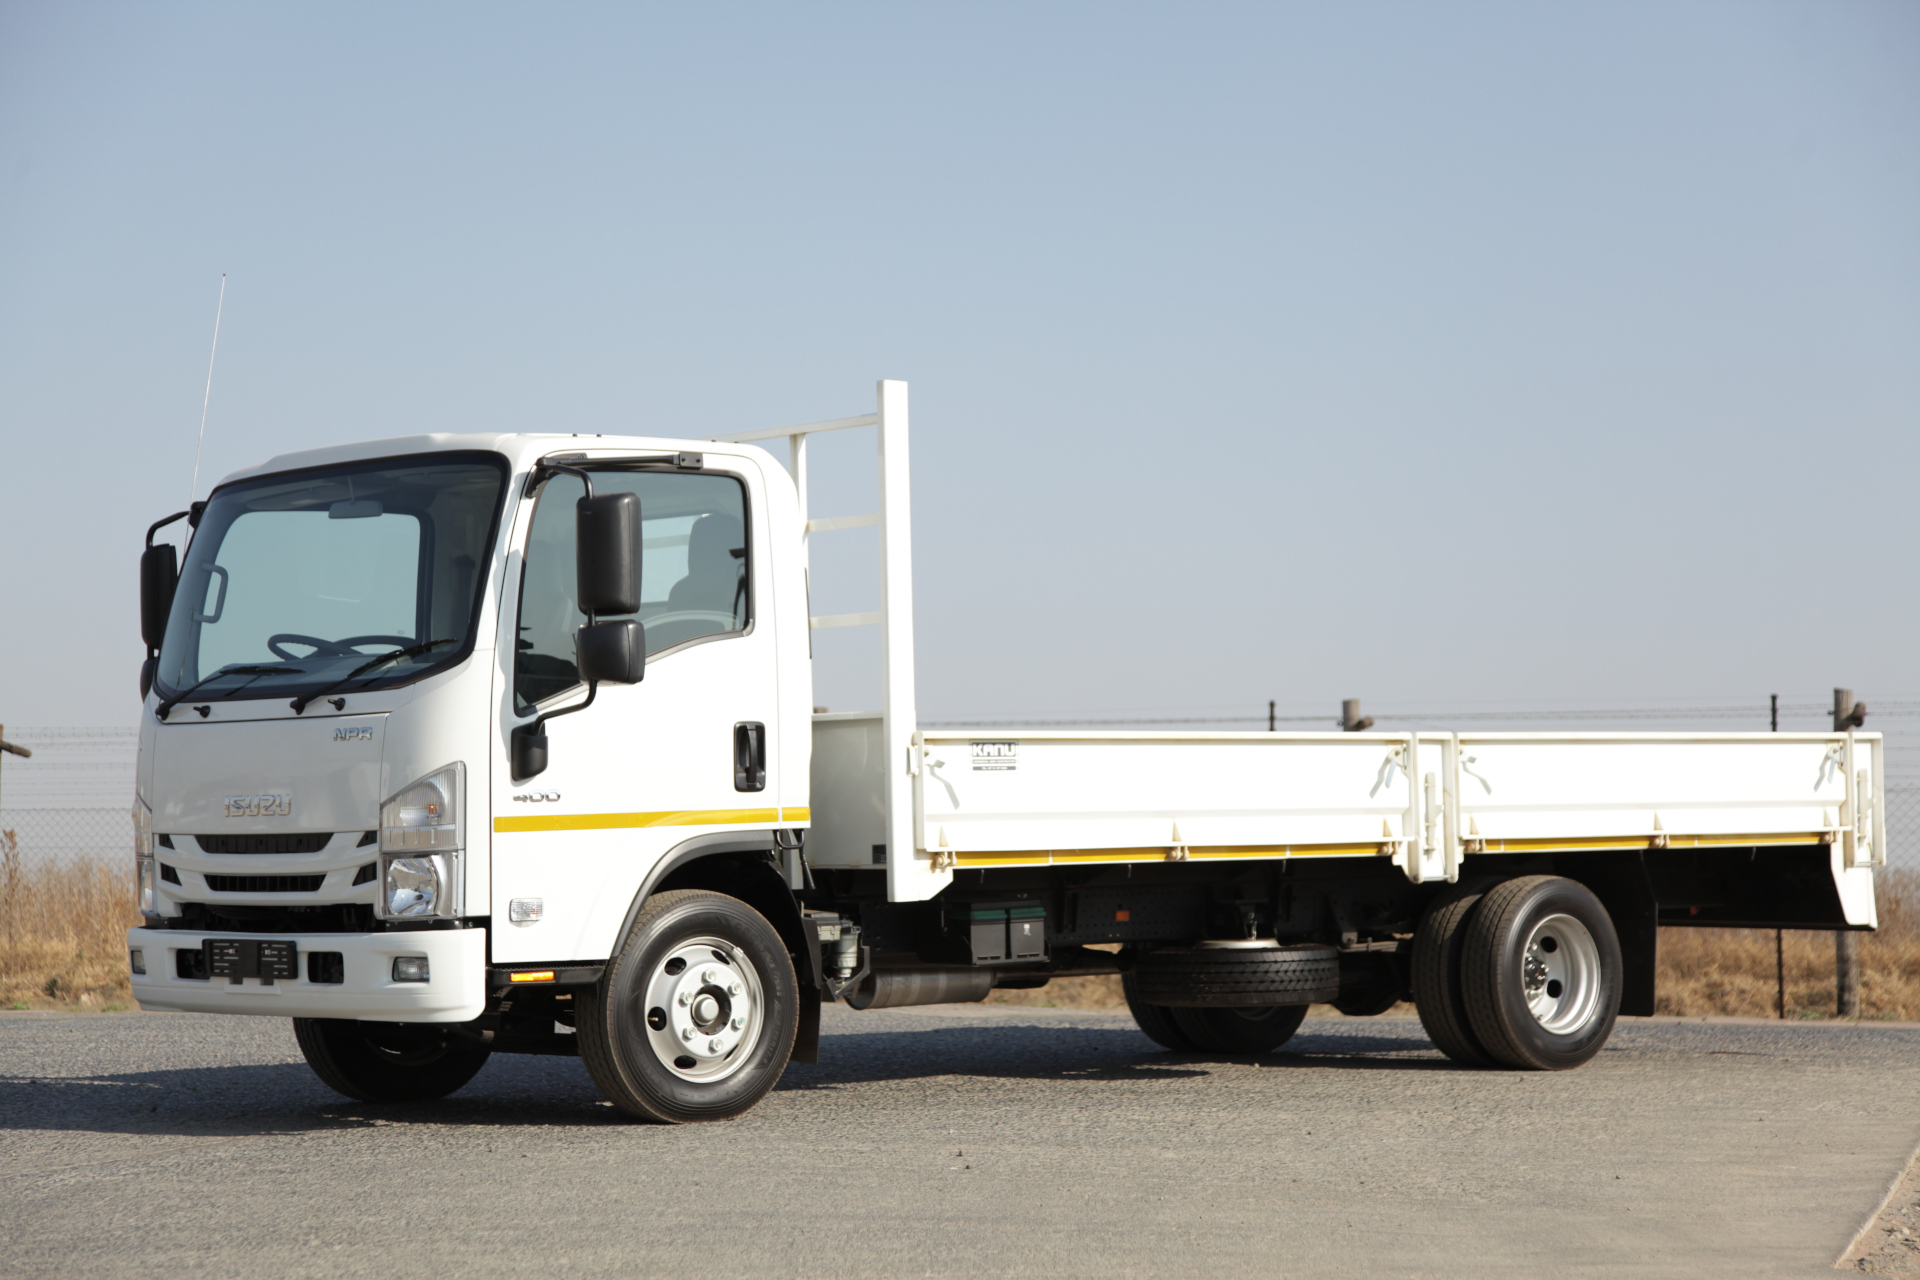 ISUZU truck rental programme – making SPACE for small and medium businesses